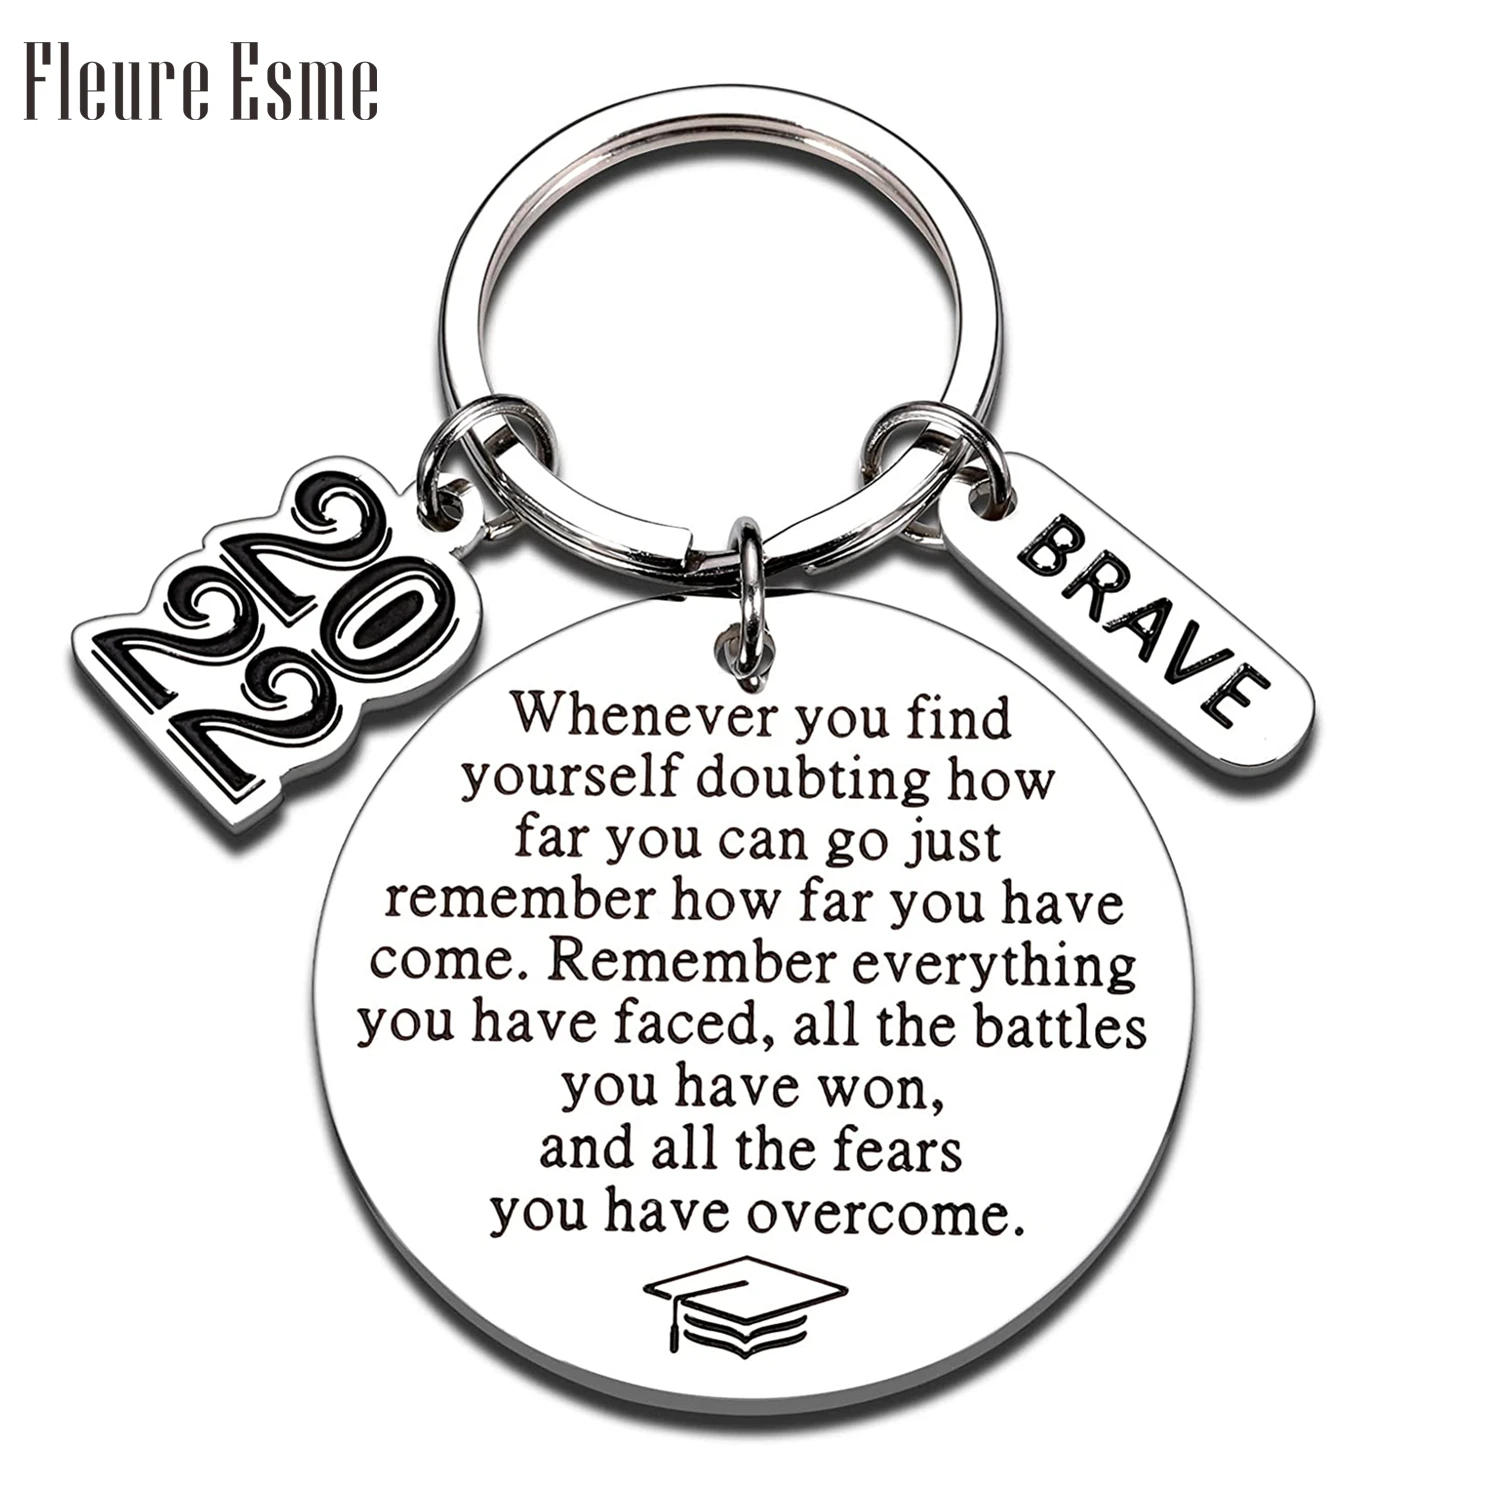 Class of 2021 Graduation Gifts Engraved Mantra Inspirational Keychain High School College Graduation Gifts for Her Him Box and Card for College Senior Graduate 